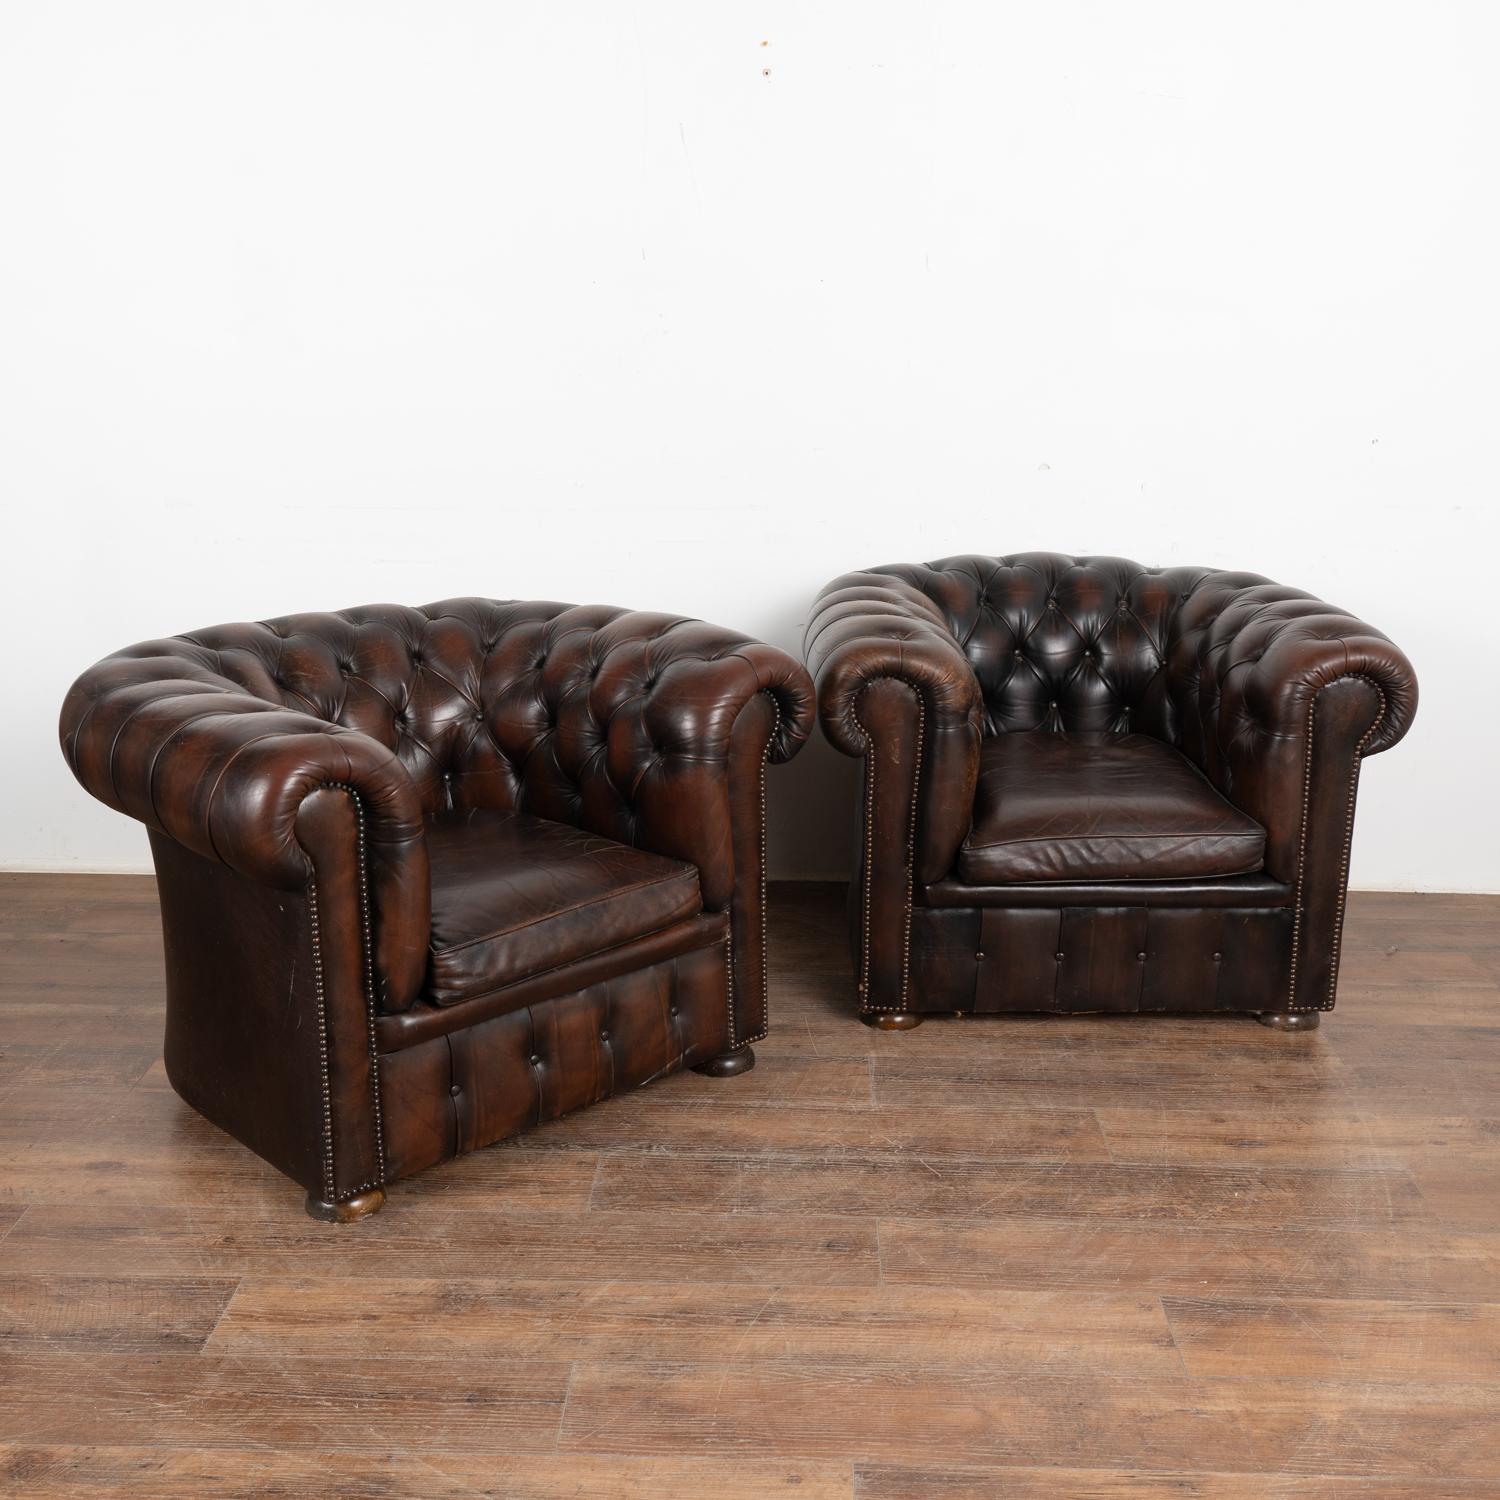 Pair, vintage brown leather chesterfield club arm chairs resting on bun feet.
Upholstered in tight button-tufted dark brown leather with nail head trim, rolled arms and loose seat cushions.
Sits comfortably and low with seat height at 16